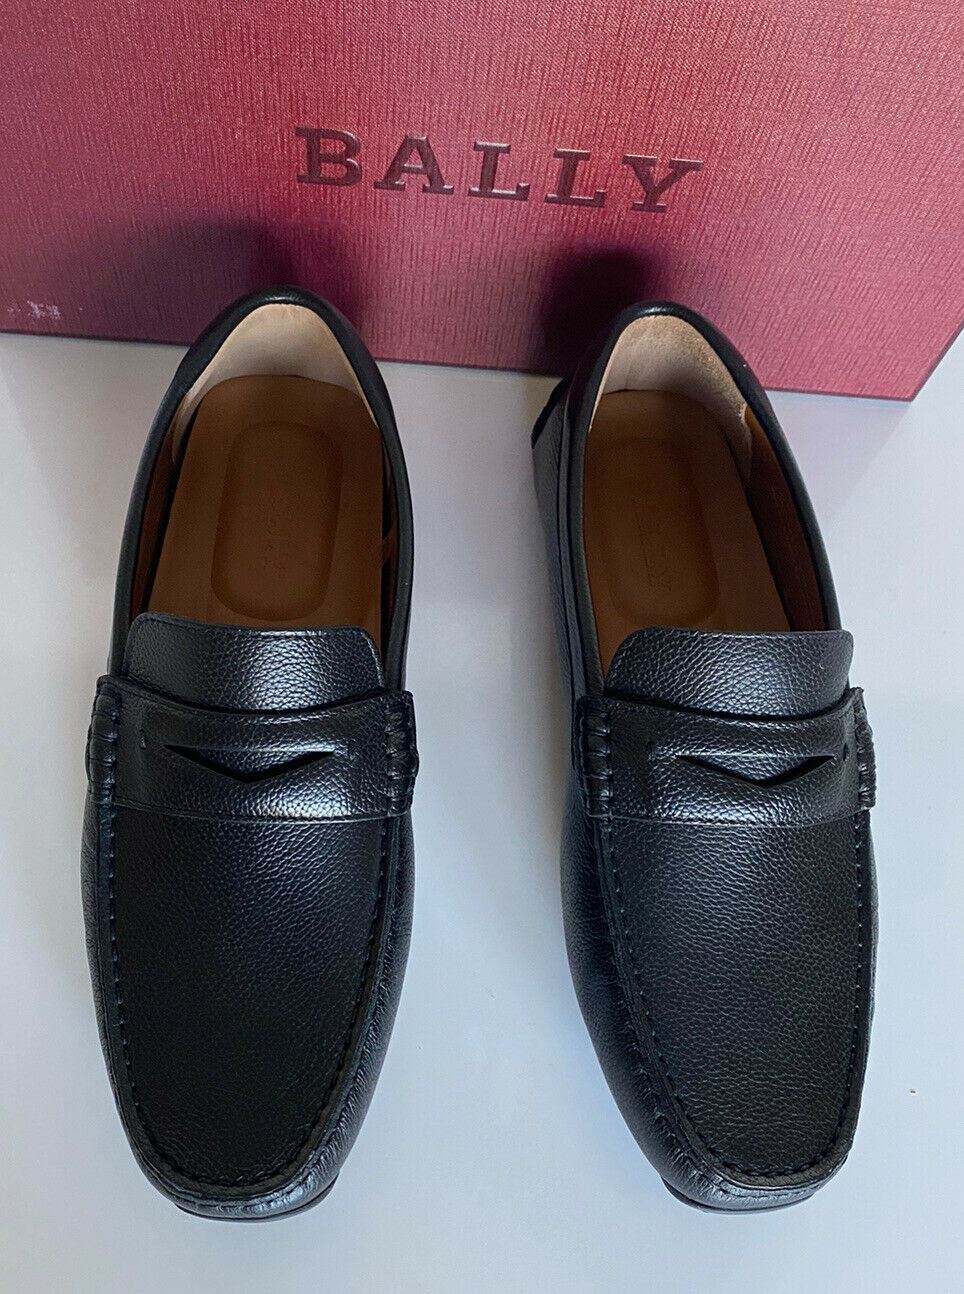 NIB Bally Mens Bovine Grained Leather Driver Loafers Shoes Black 8.5 US 6233869